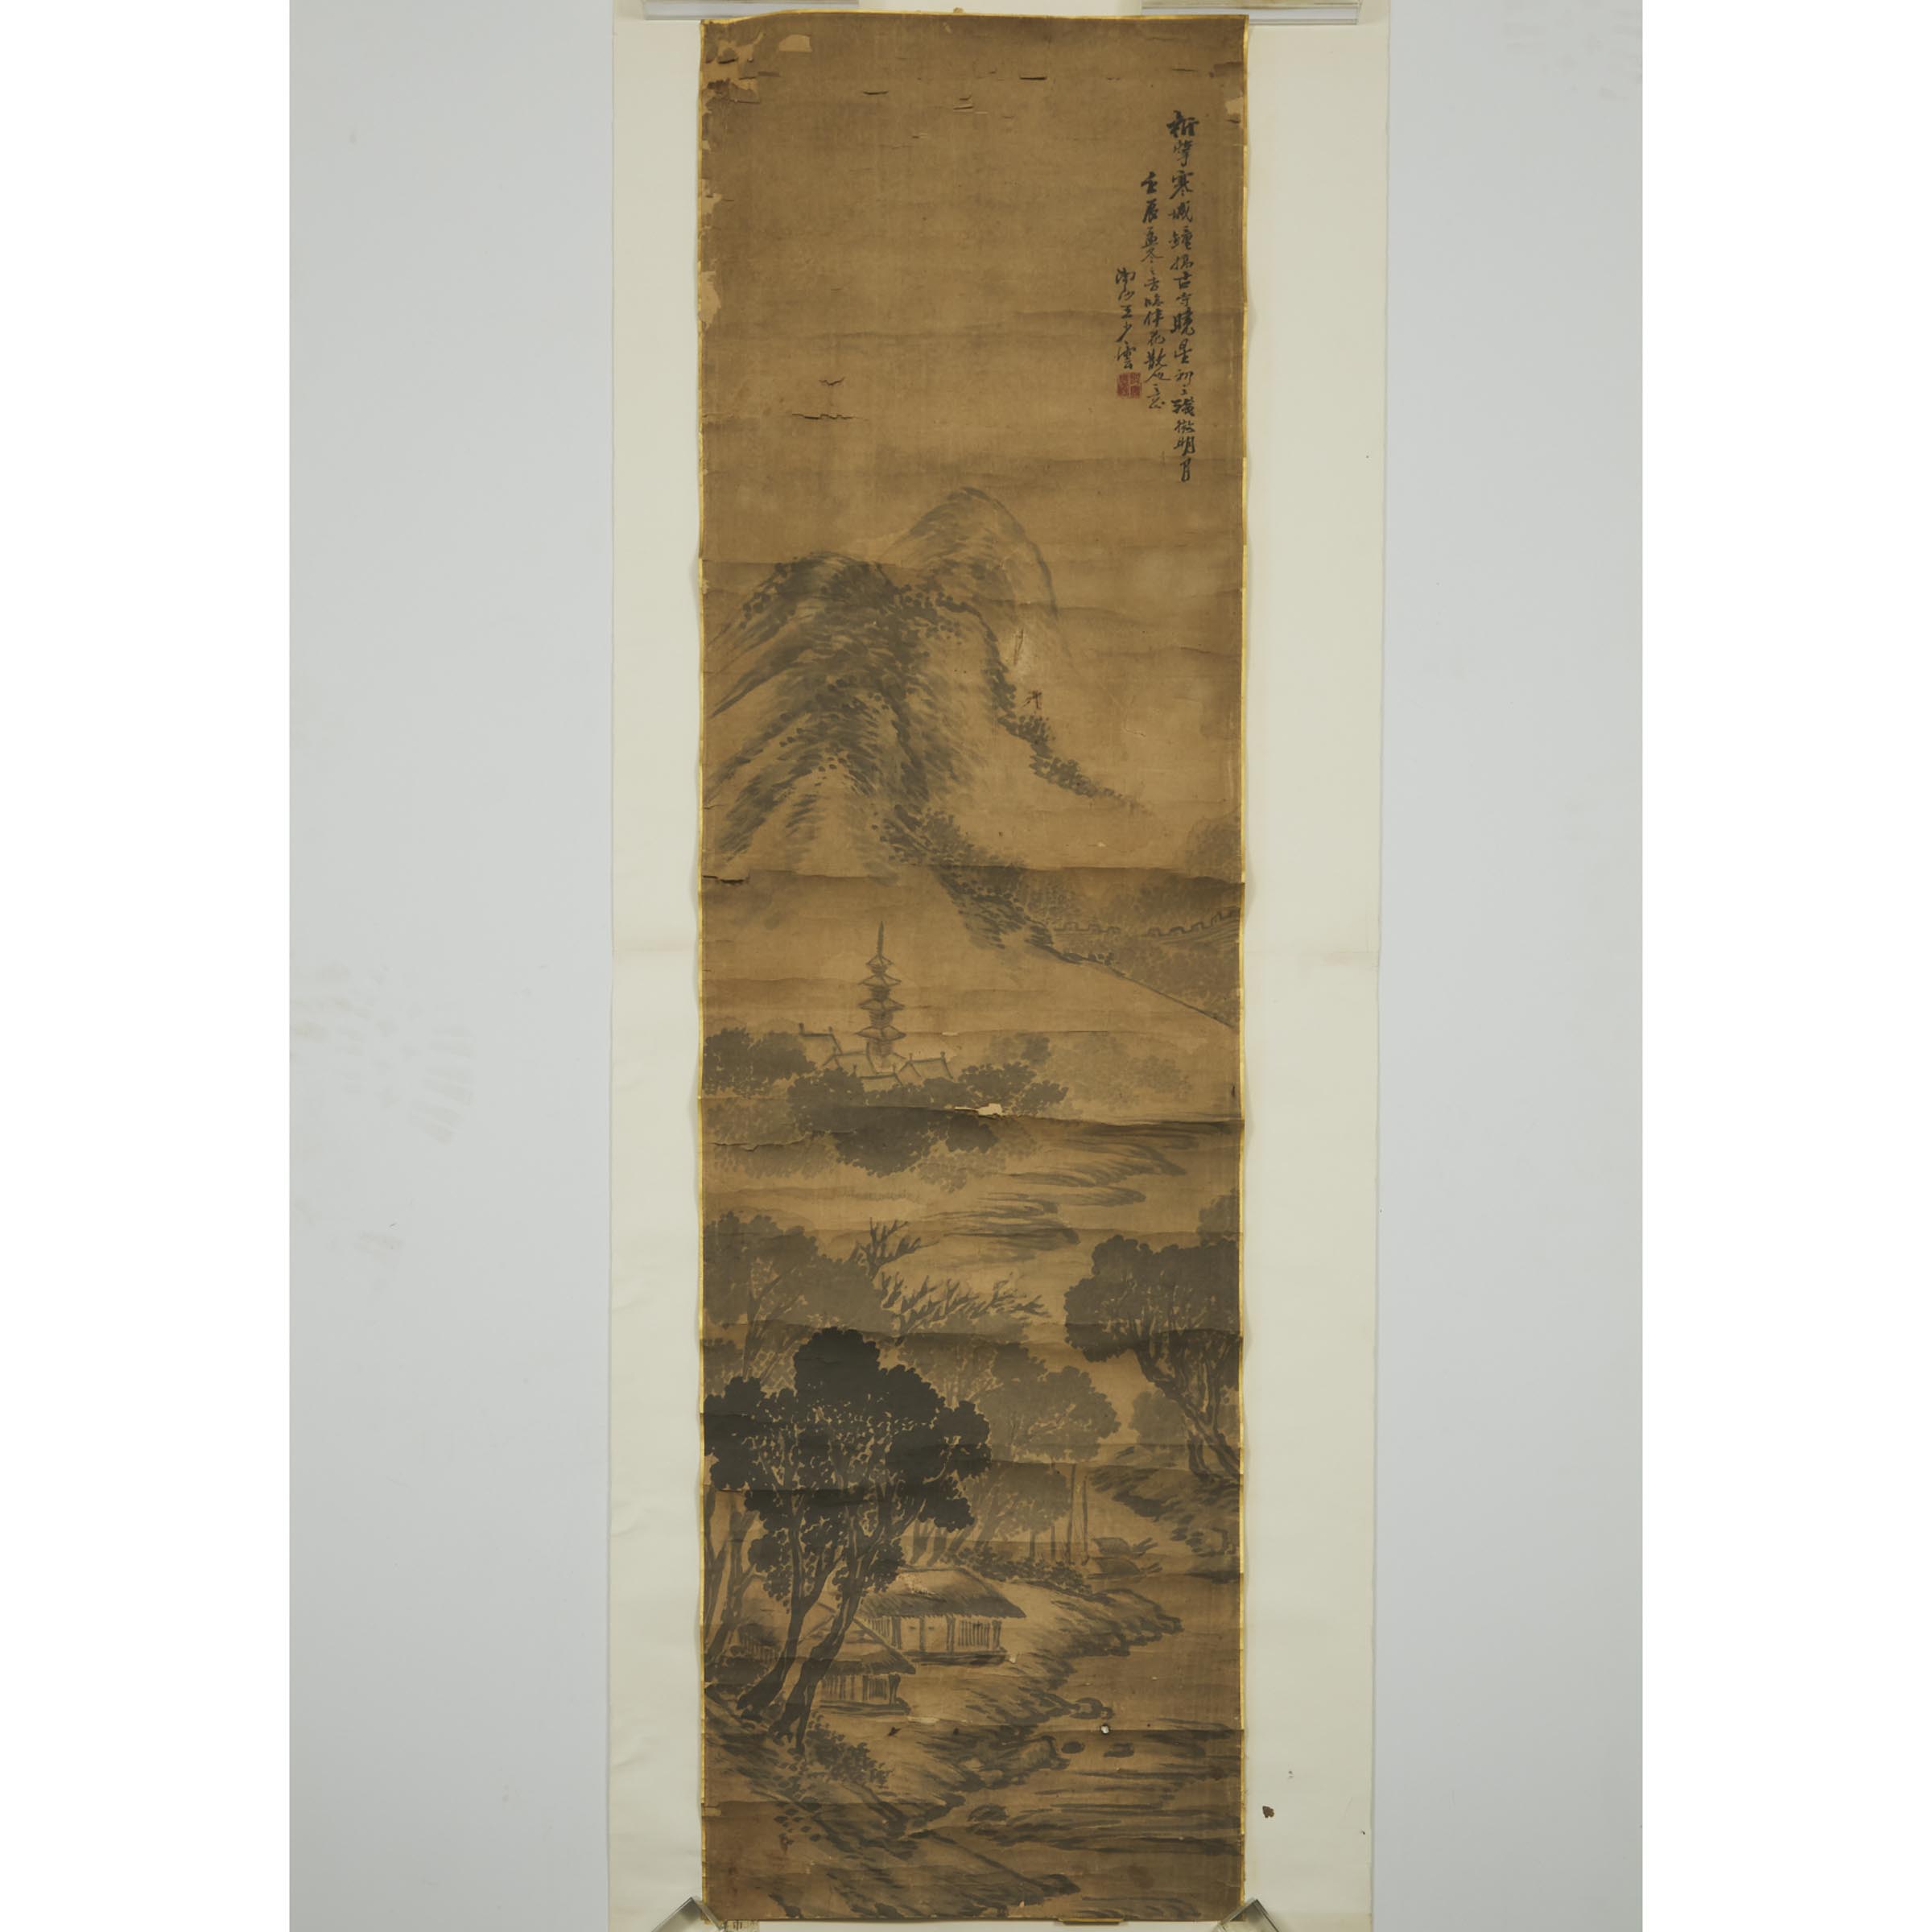 Attributed to Wang Shaoyun, Landscape, Together with A Set of Four 'Four Seasons' Paintings, Late Qing Dynasty  